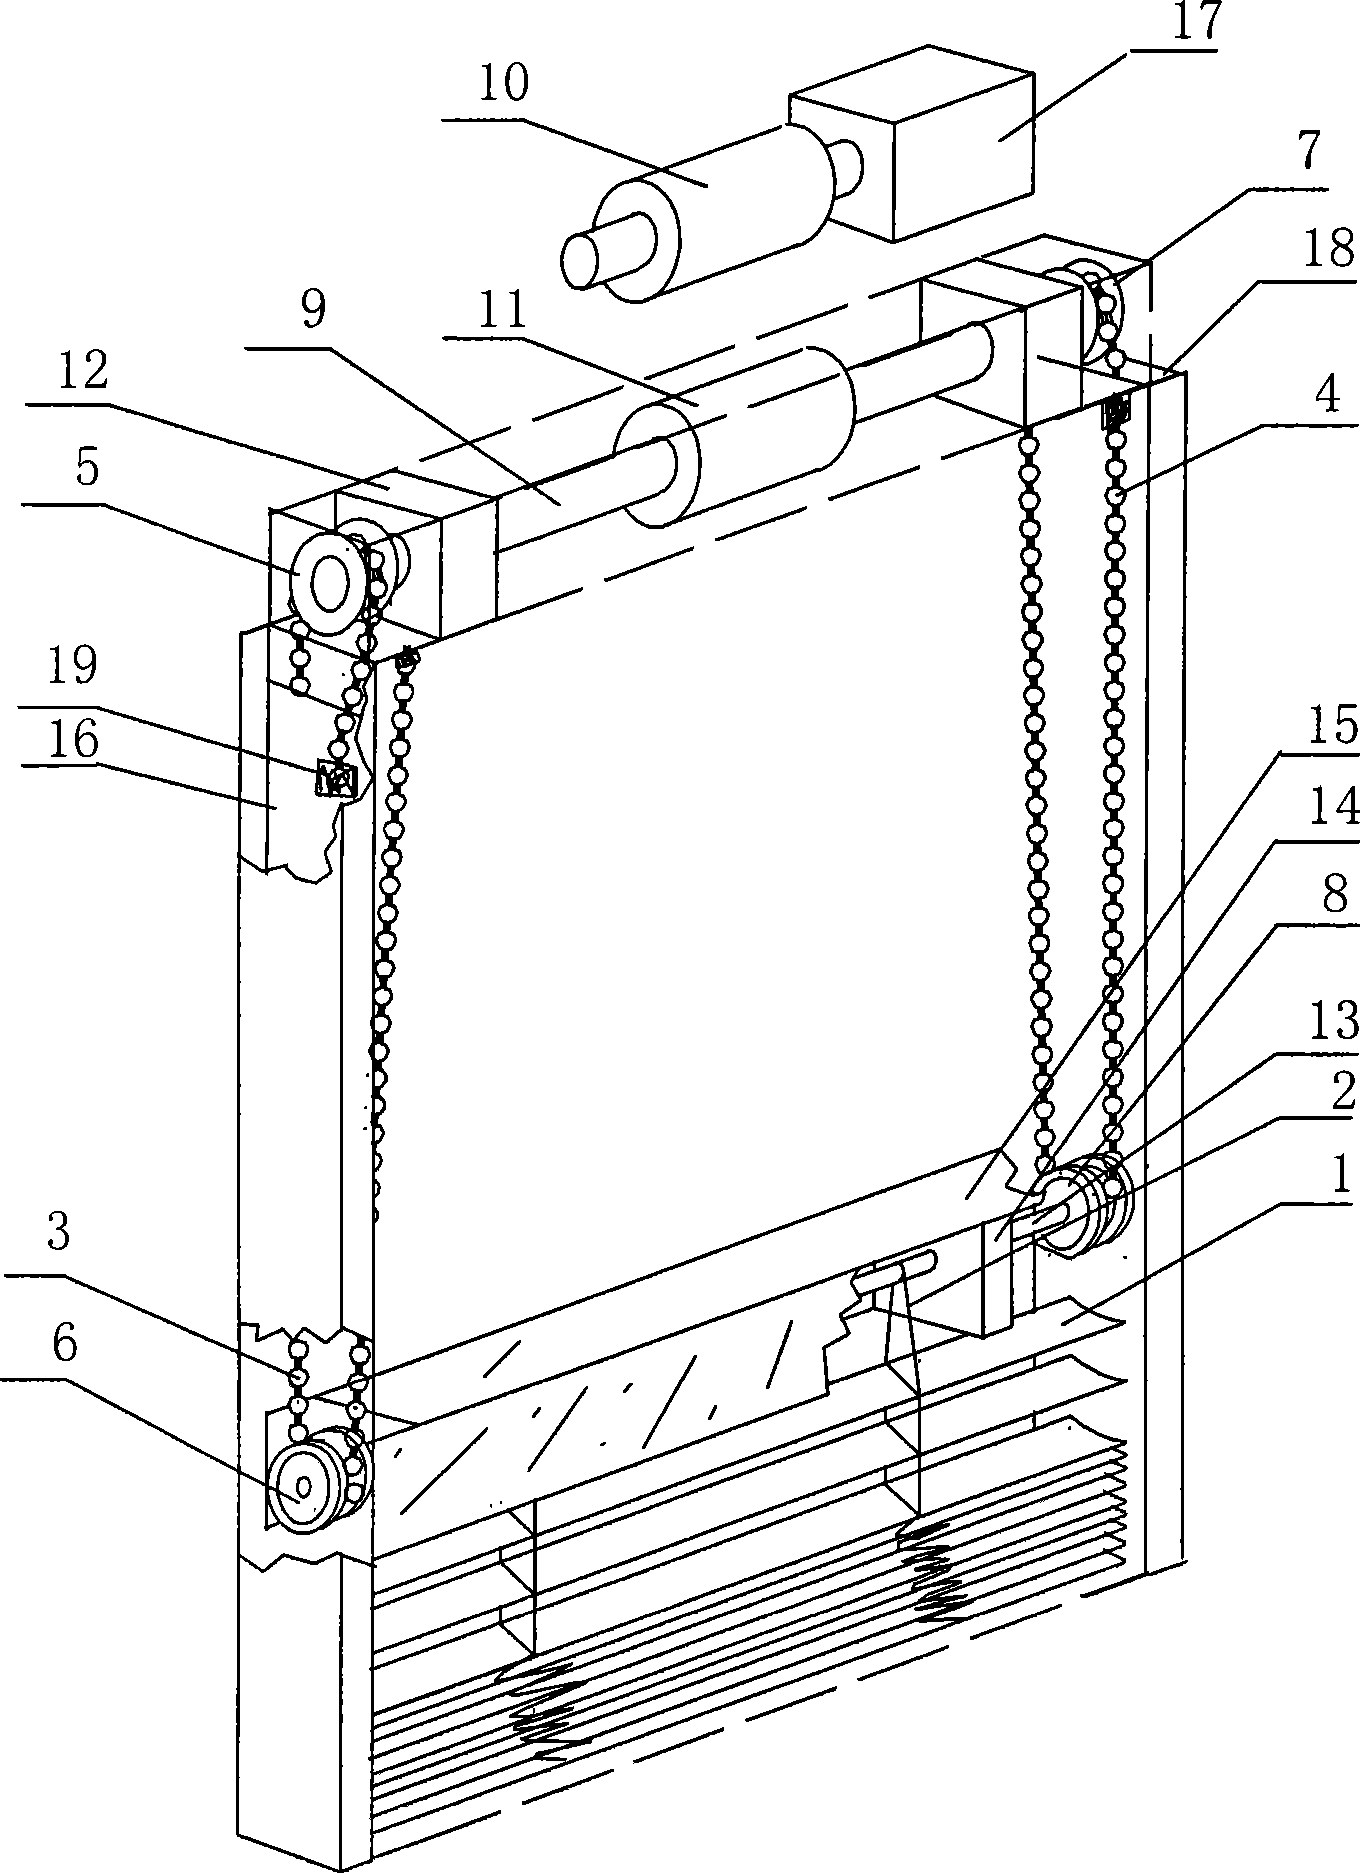 Chain drive of bottom-fixed blind curtain